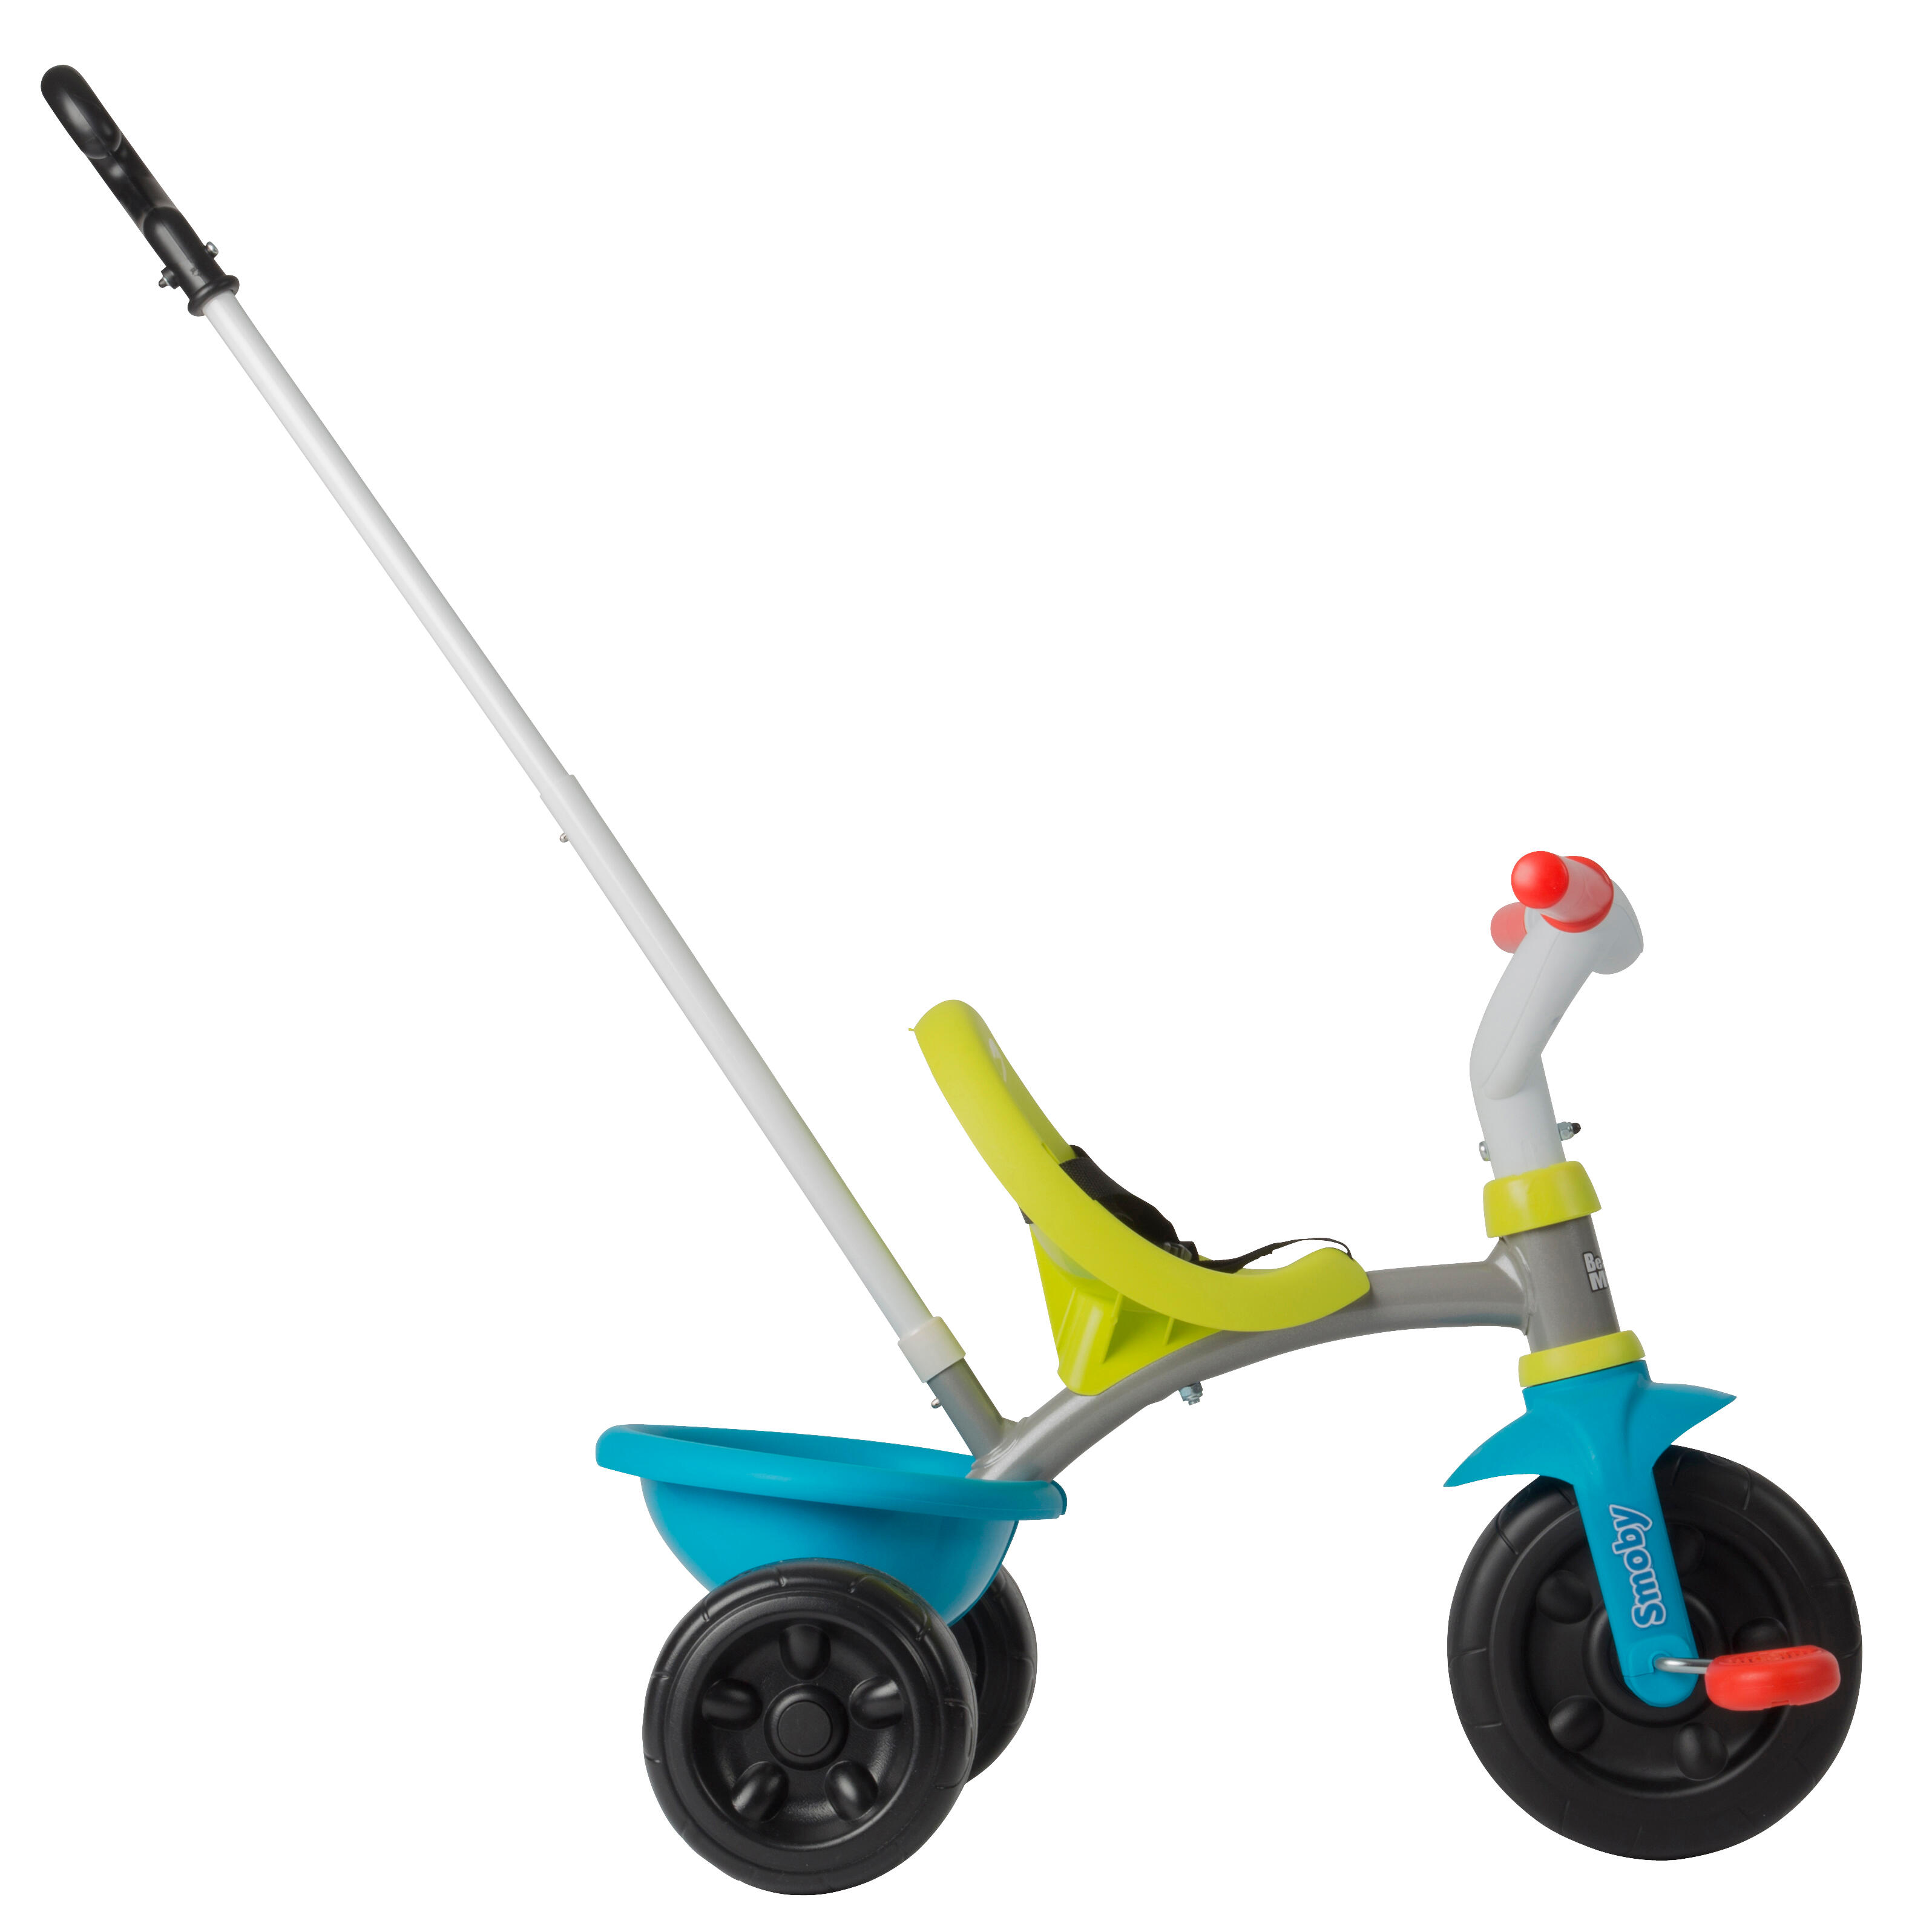 Tricycle Enfant Be Move Smoby Bleu Vert Smoby Decathlon